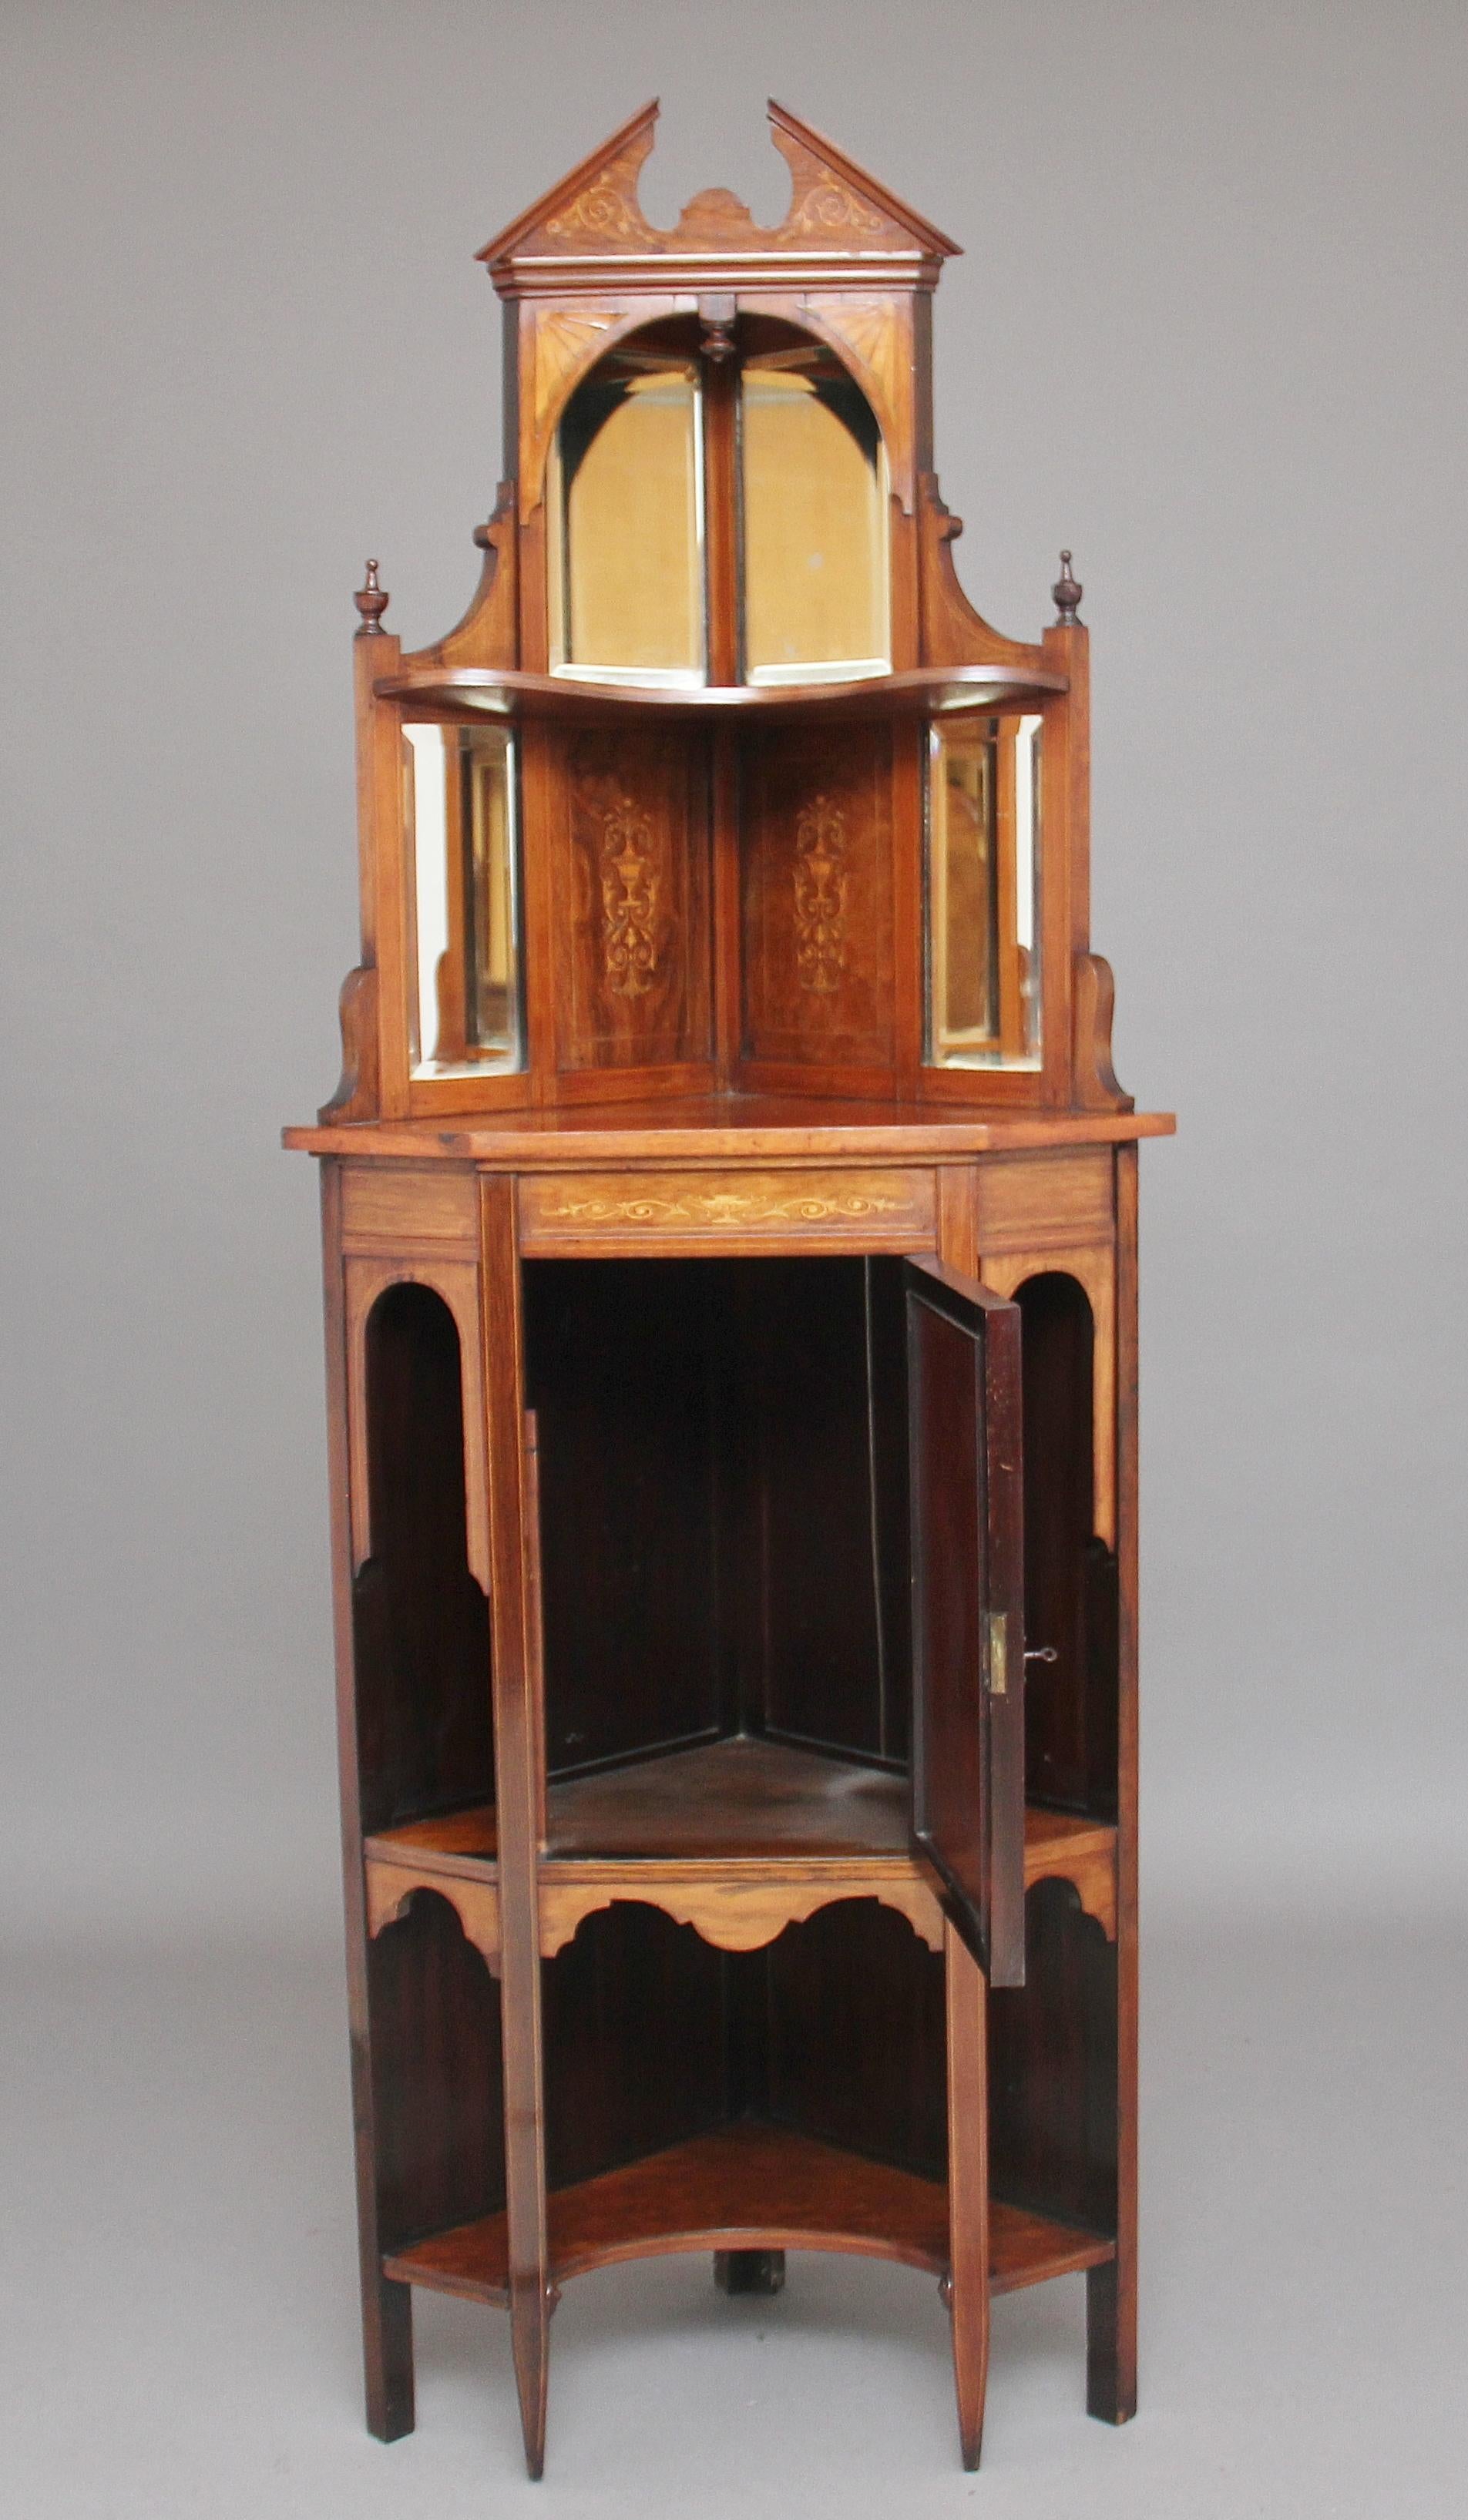 An early 20th century rosewood and marquetry inlaid standing corner cabinet, the broken arched pediment above a mirrored back, the central cupboard door inlaid with swags and bows above an urn, standing on square tapered legs, circa 1910.